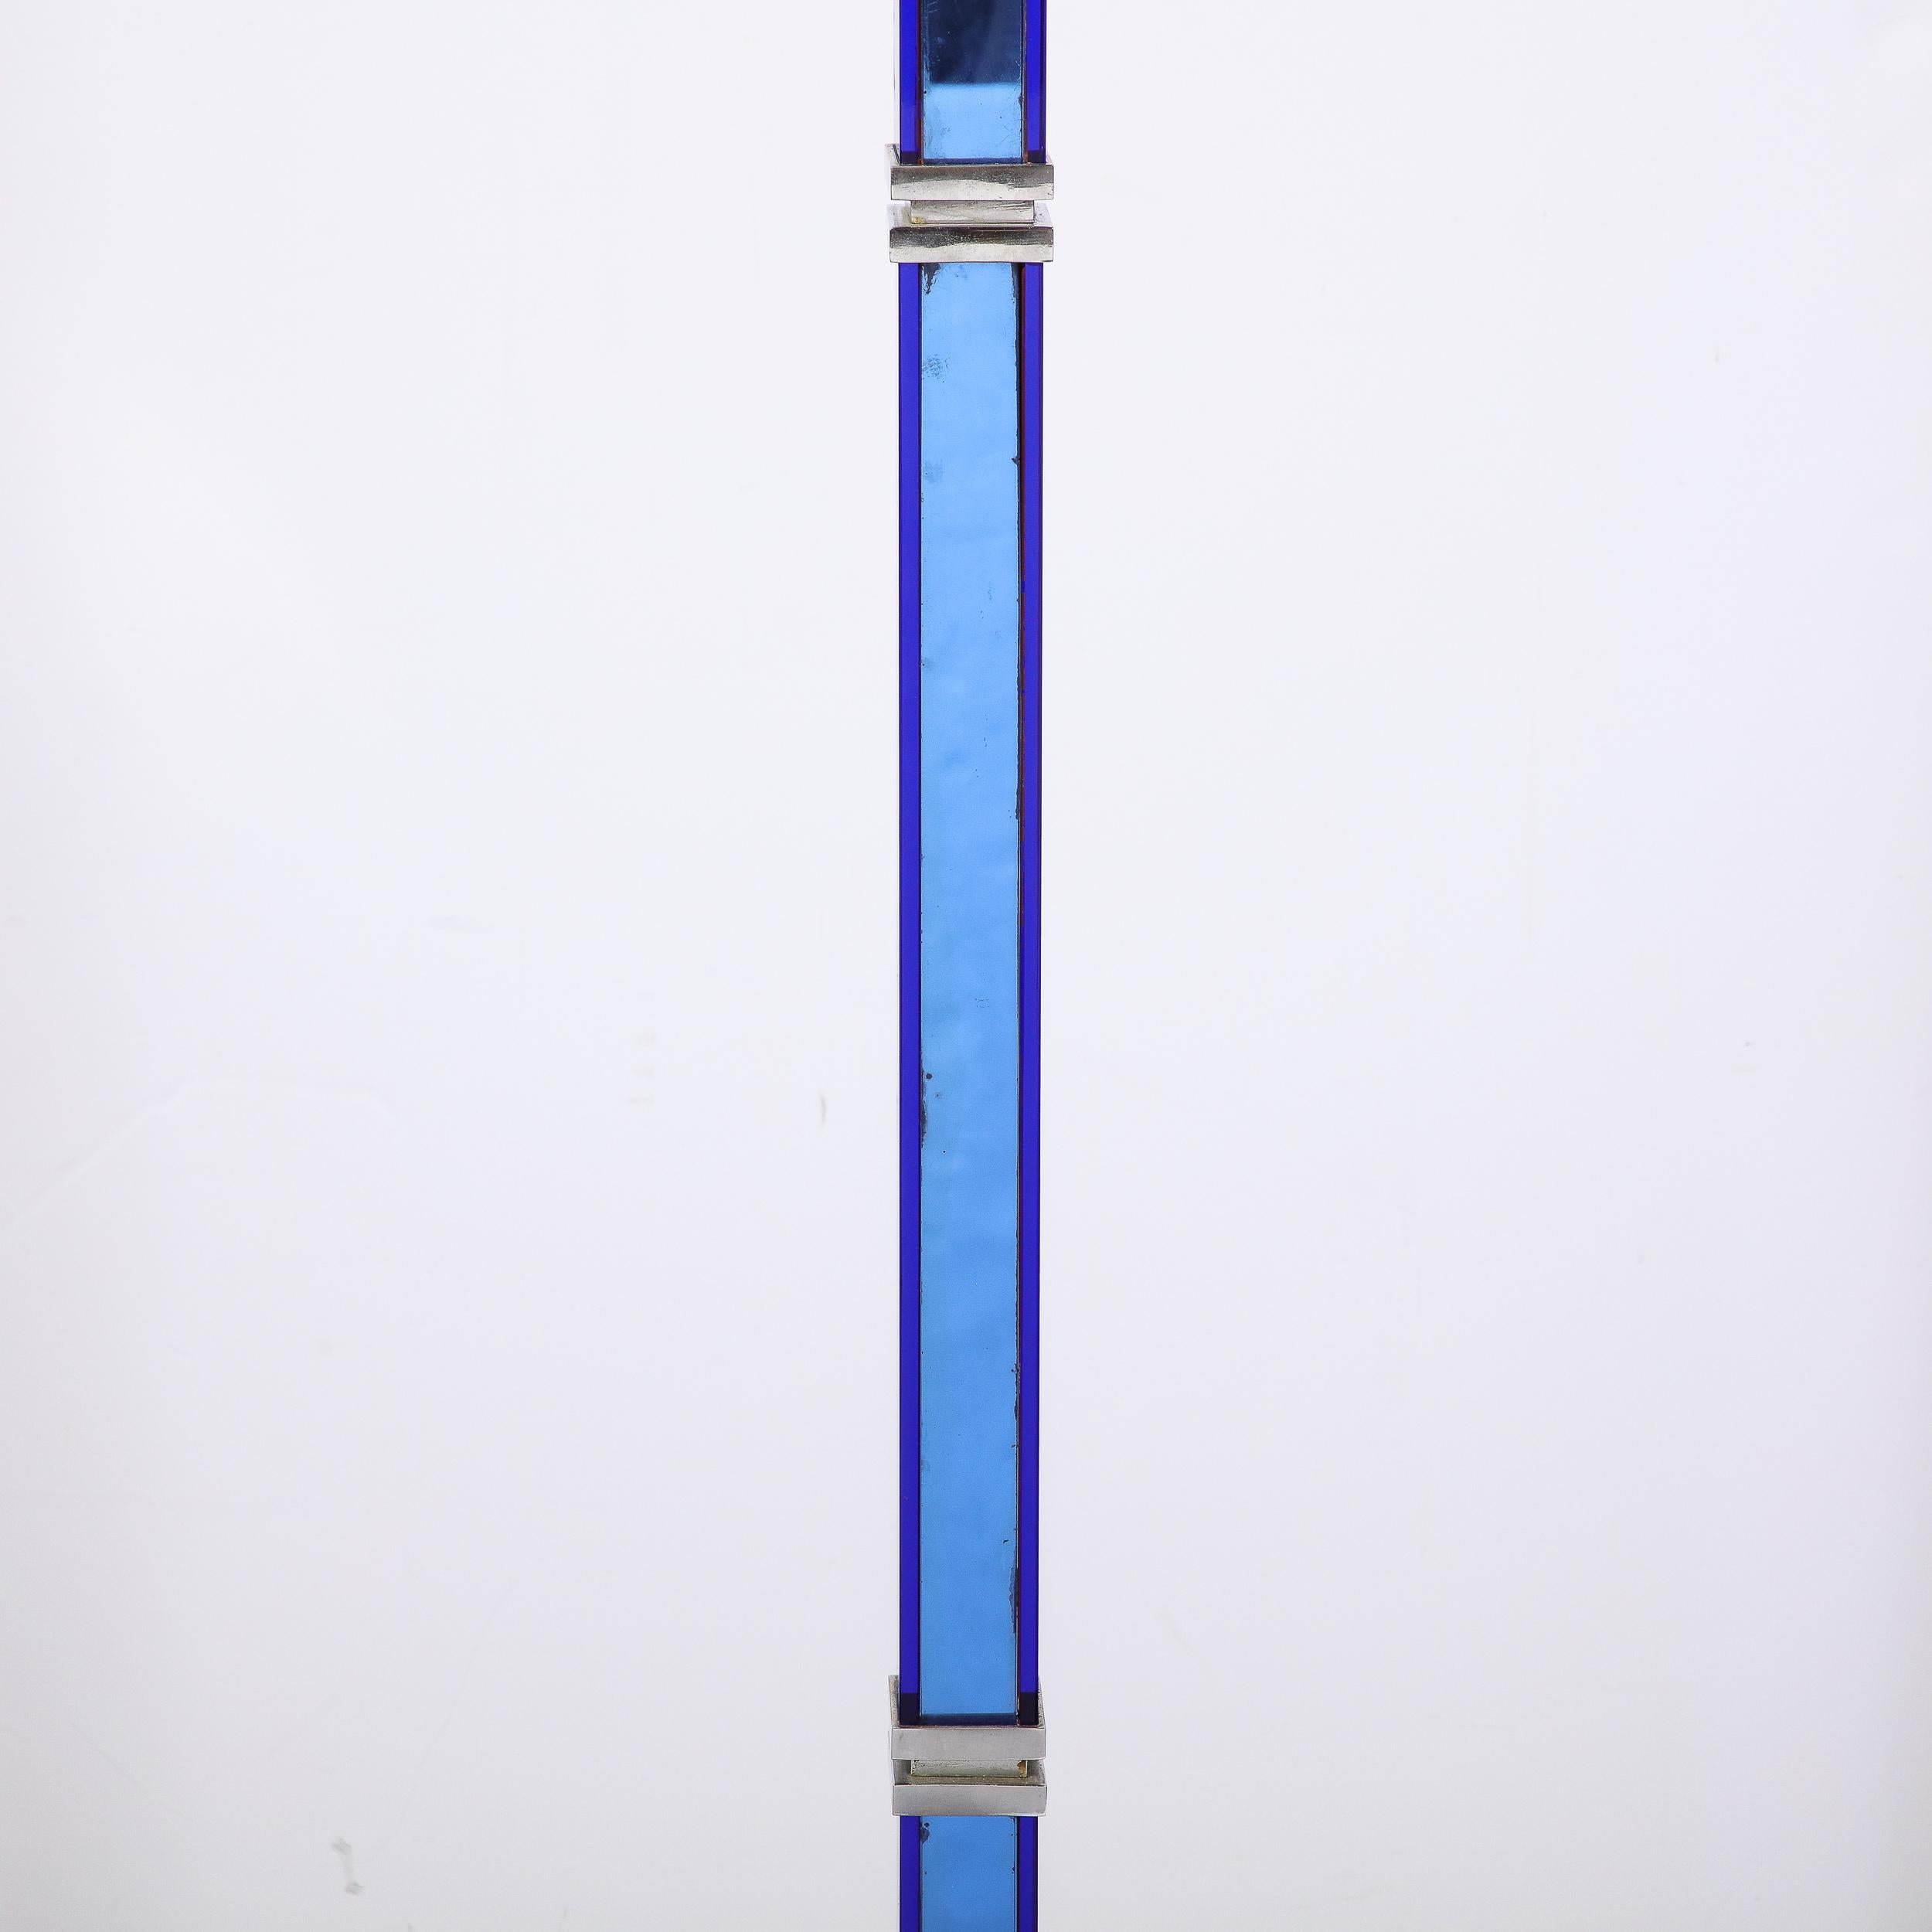 This Art Deco blue and Milk Glass Torchiere, originating from the United States Circa 1935 is an excellent example of the Machine Ages influence on Art Deco in America. This artful cobalt blue glass and satin nickel torchiere incorporates classic